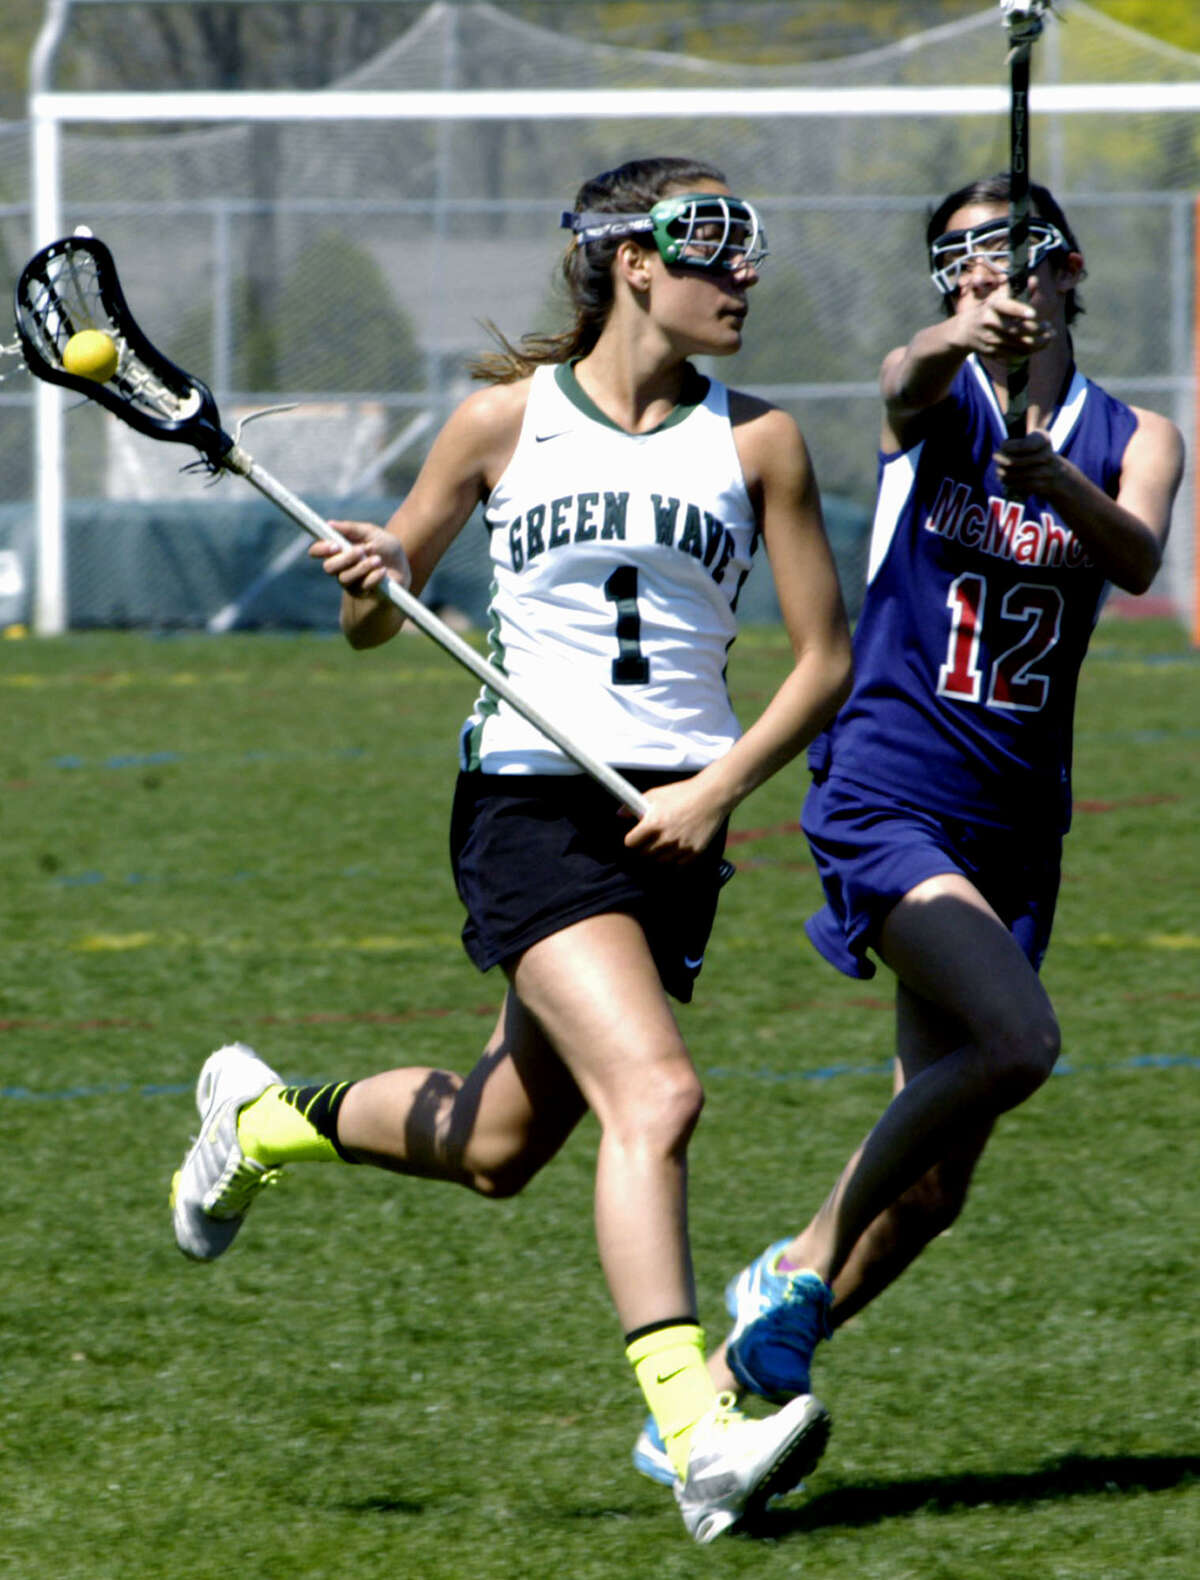 The Green Wave's Destinee Carey surveys the offensive zone for an open teammate during New Milford High School girls' lacrosse's 17-9 victory over Brien McMahon, April 27, 2013 at NMHS.